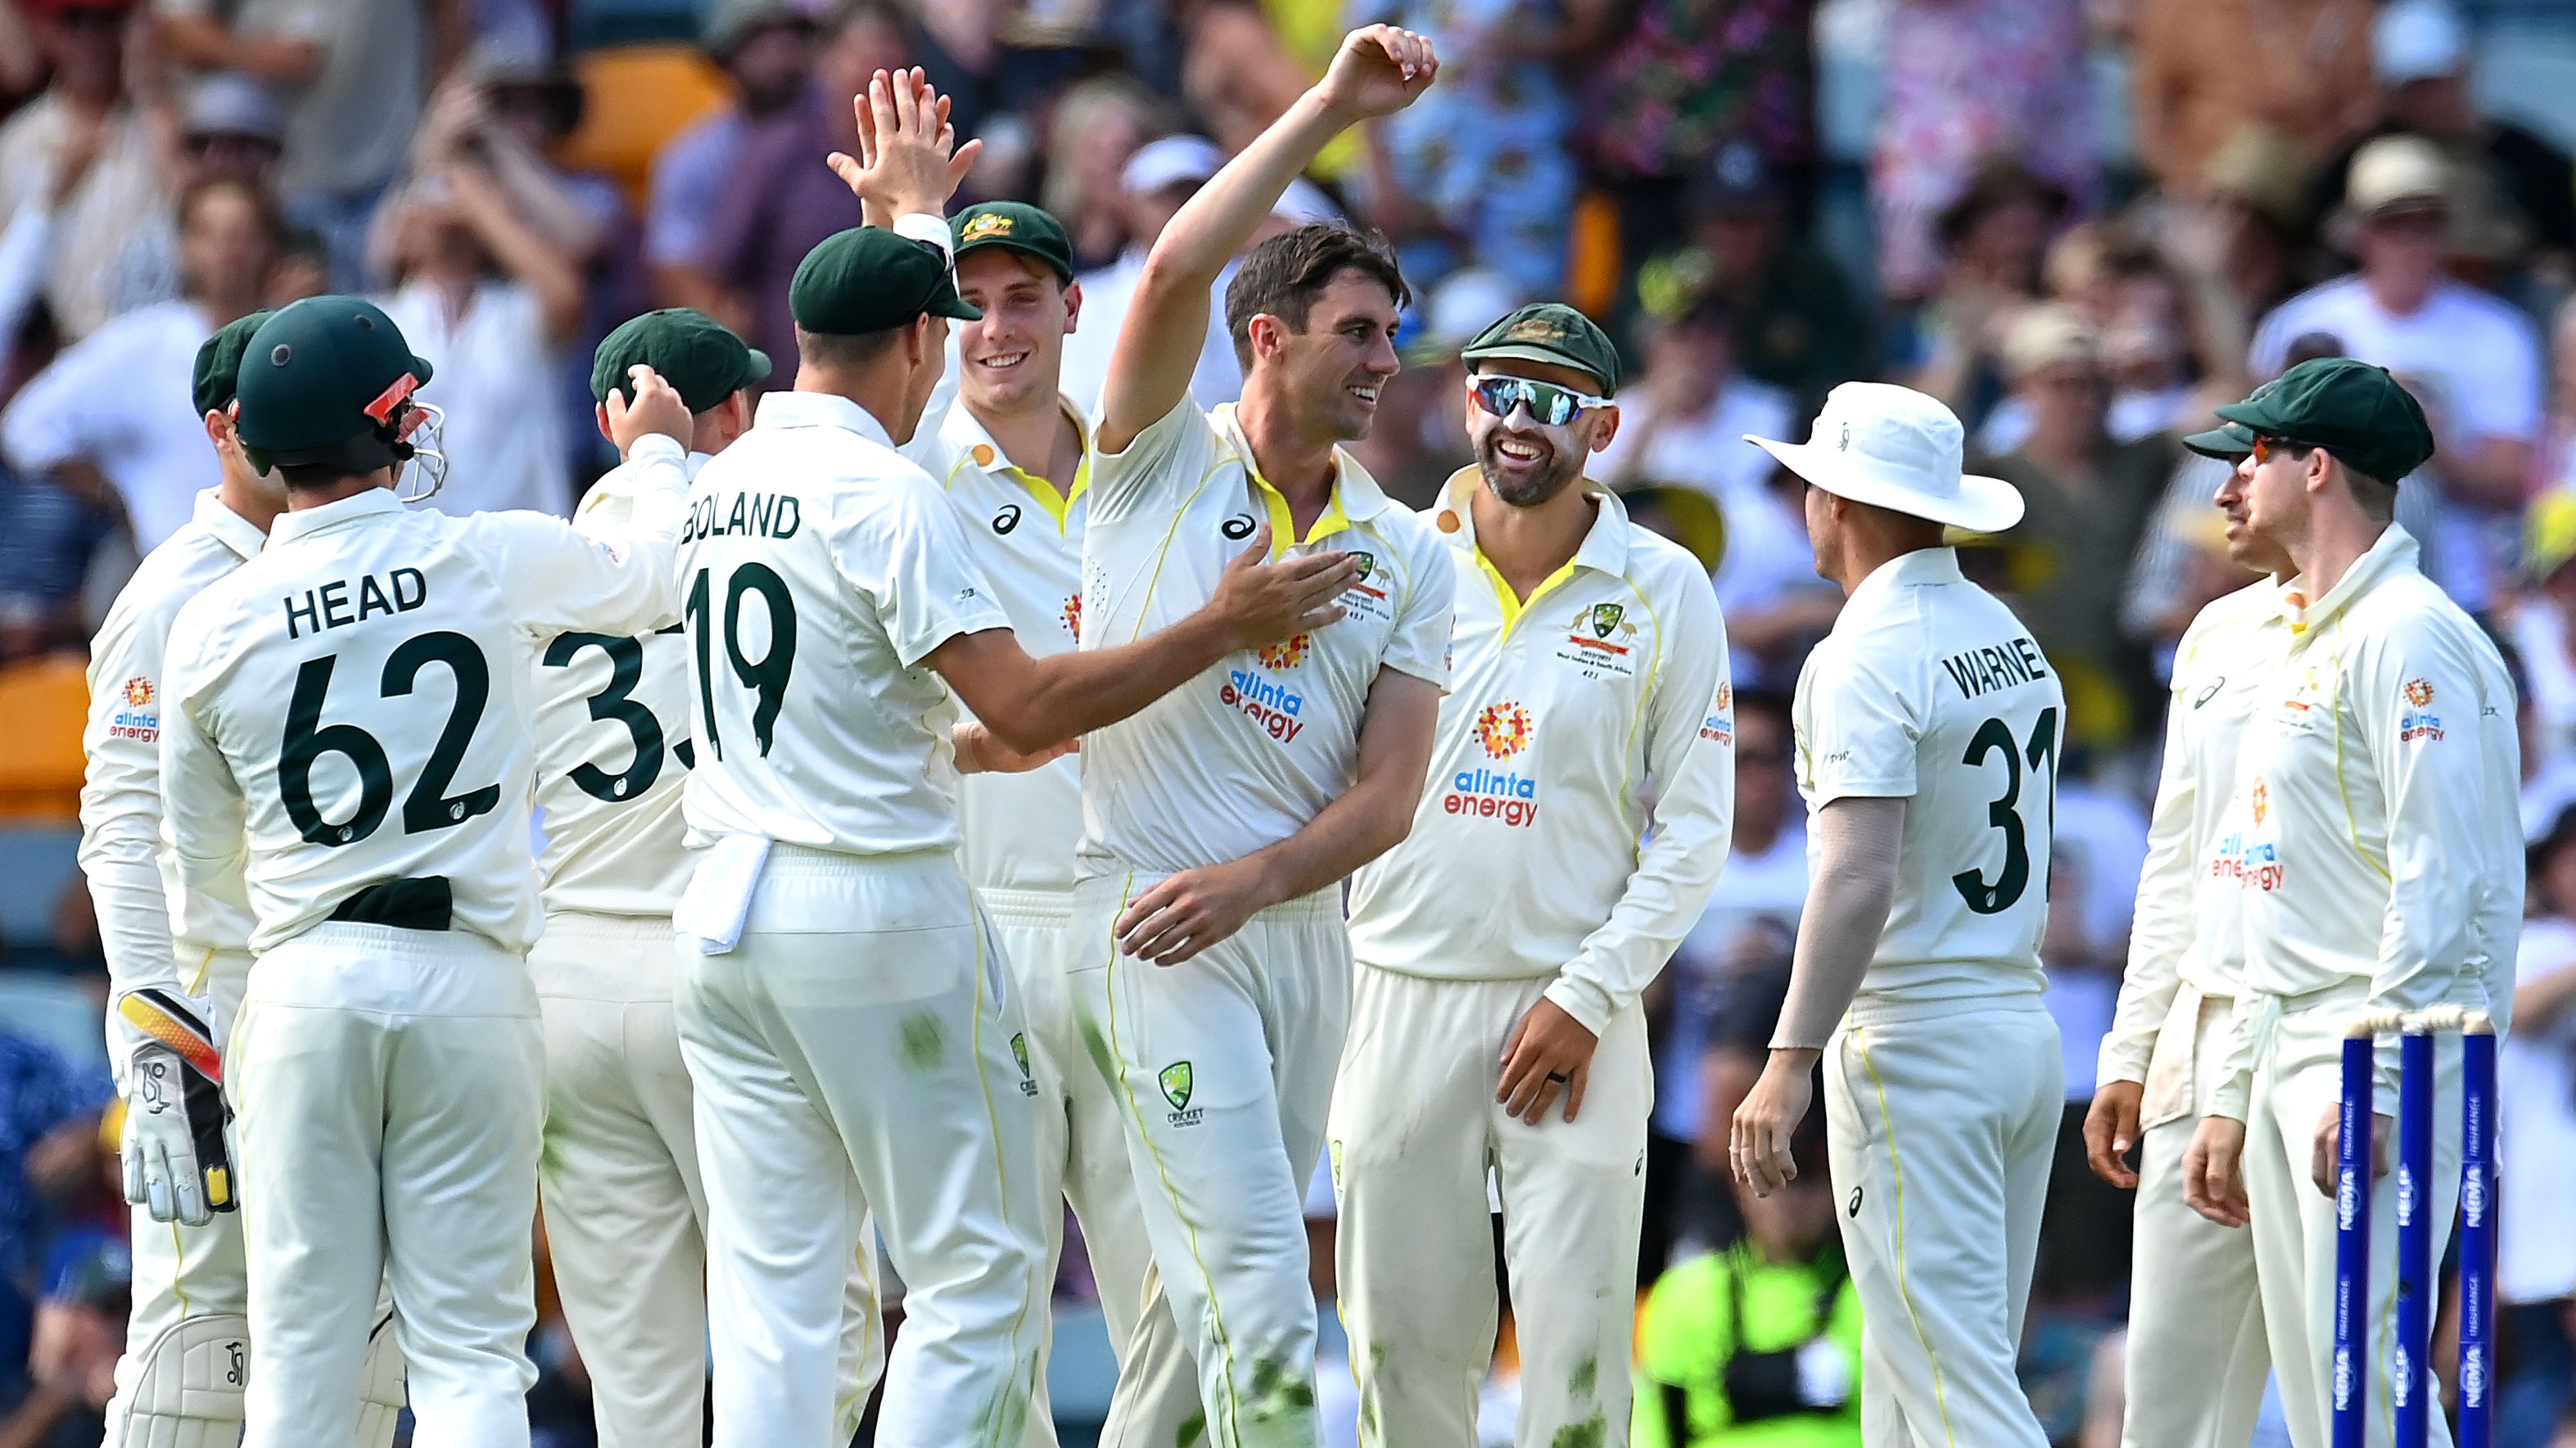 Australia celebrate a wicket during day two of the first Test between Australia and South Africa.